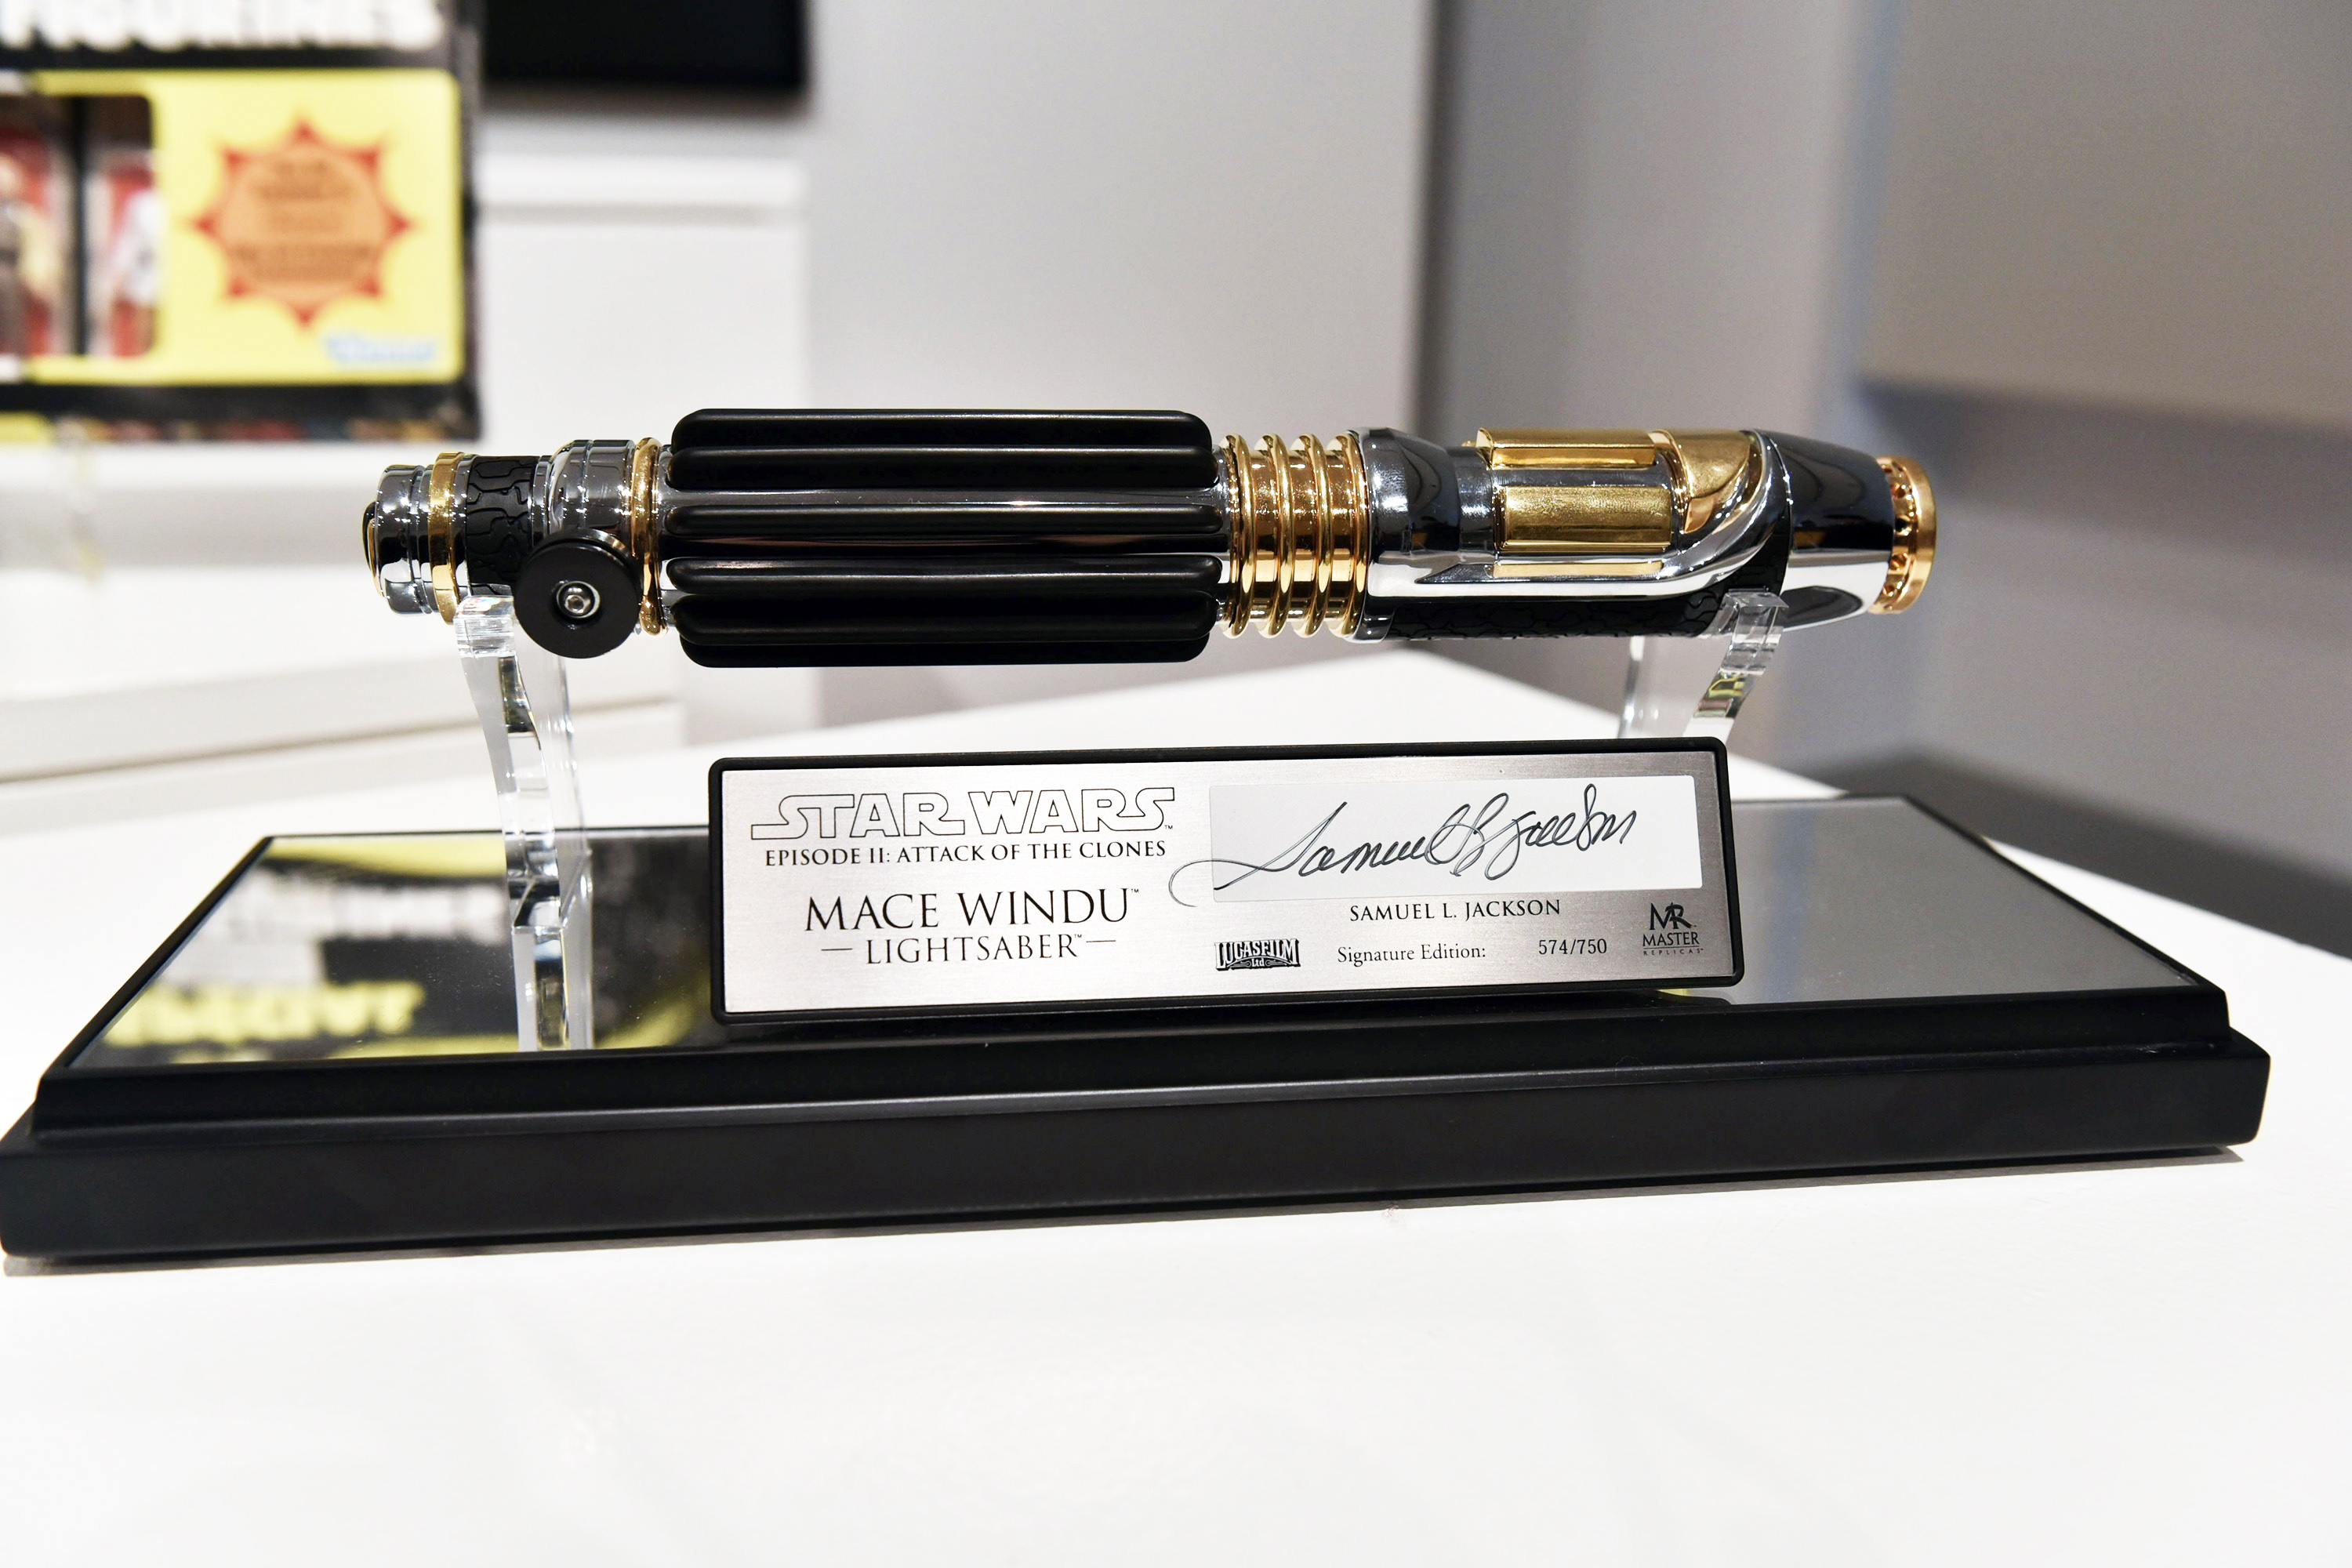 A Mace Windu lightsaber from 2002, signed by Samuel L. Jackson, is displayed at Sotheby's in New York City on Dec. 2, 2015.